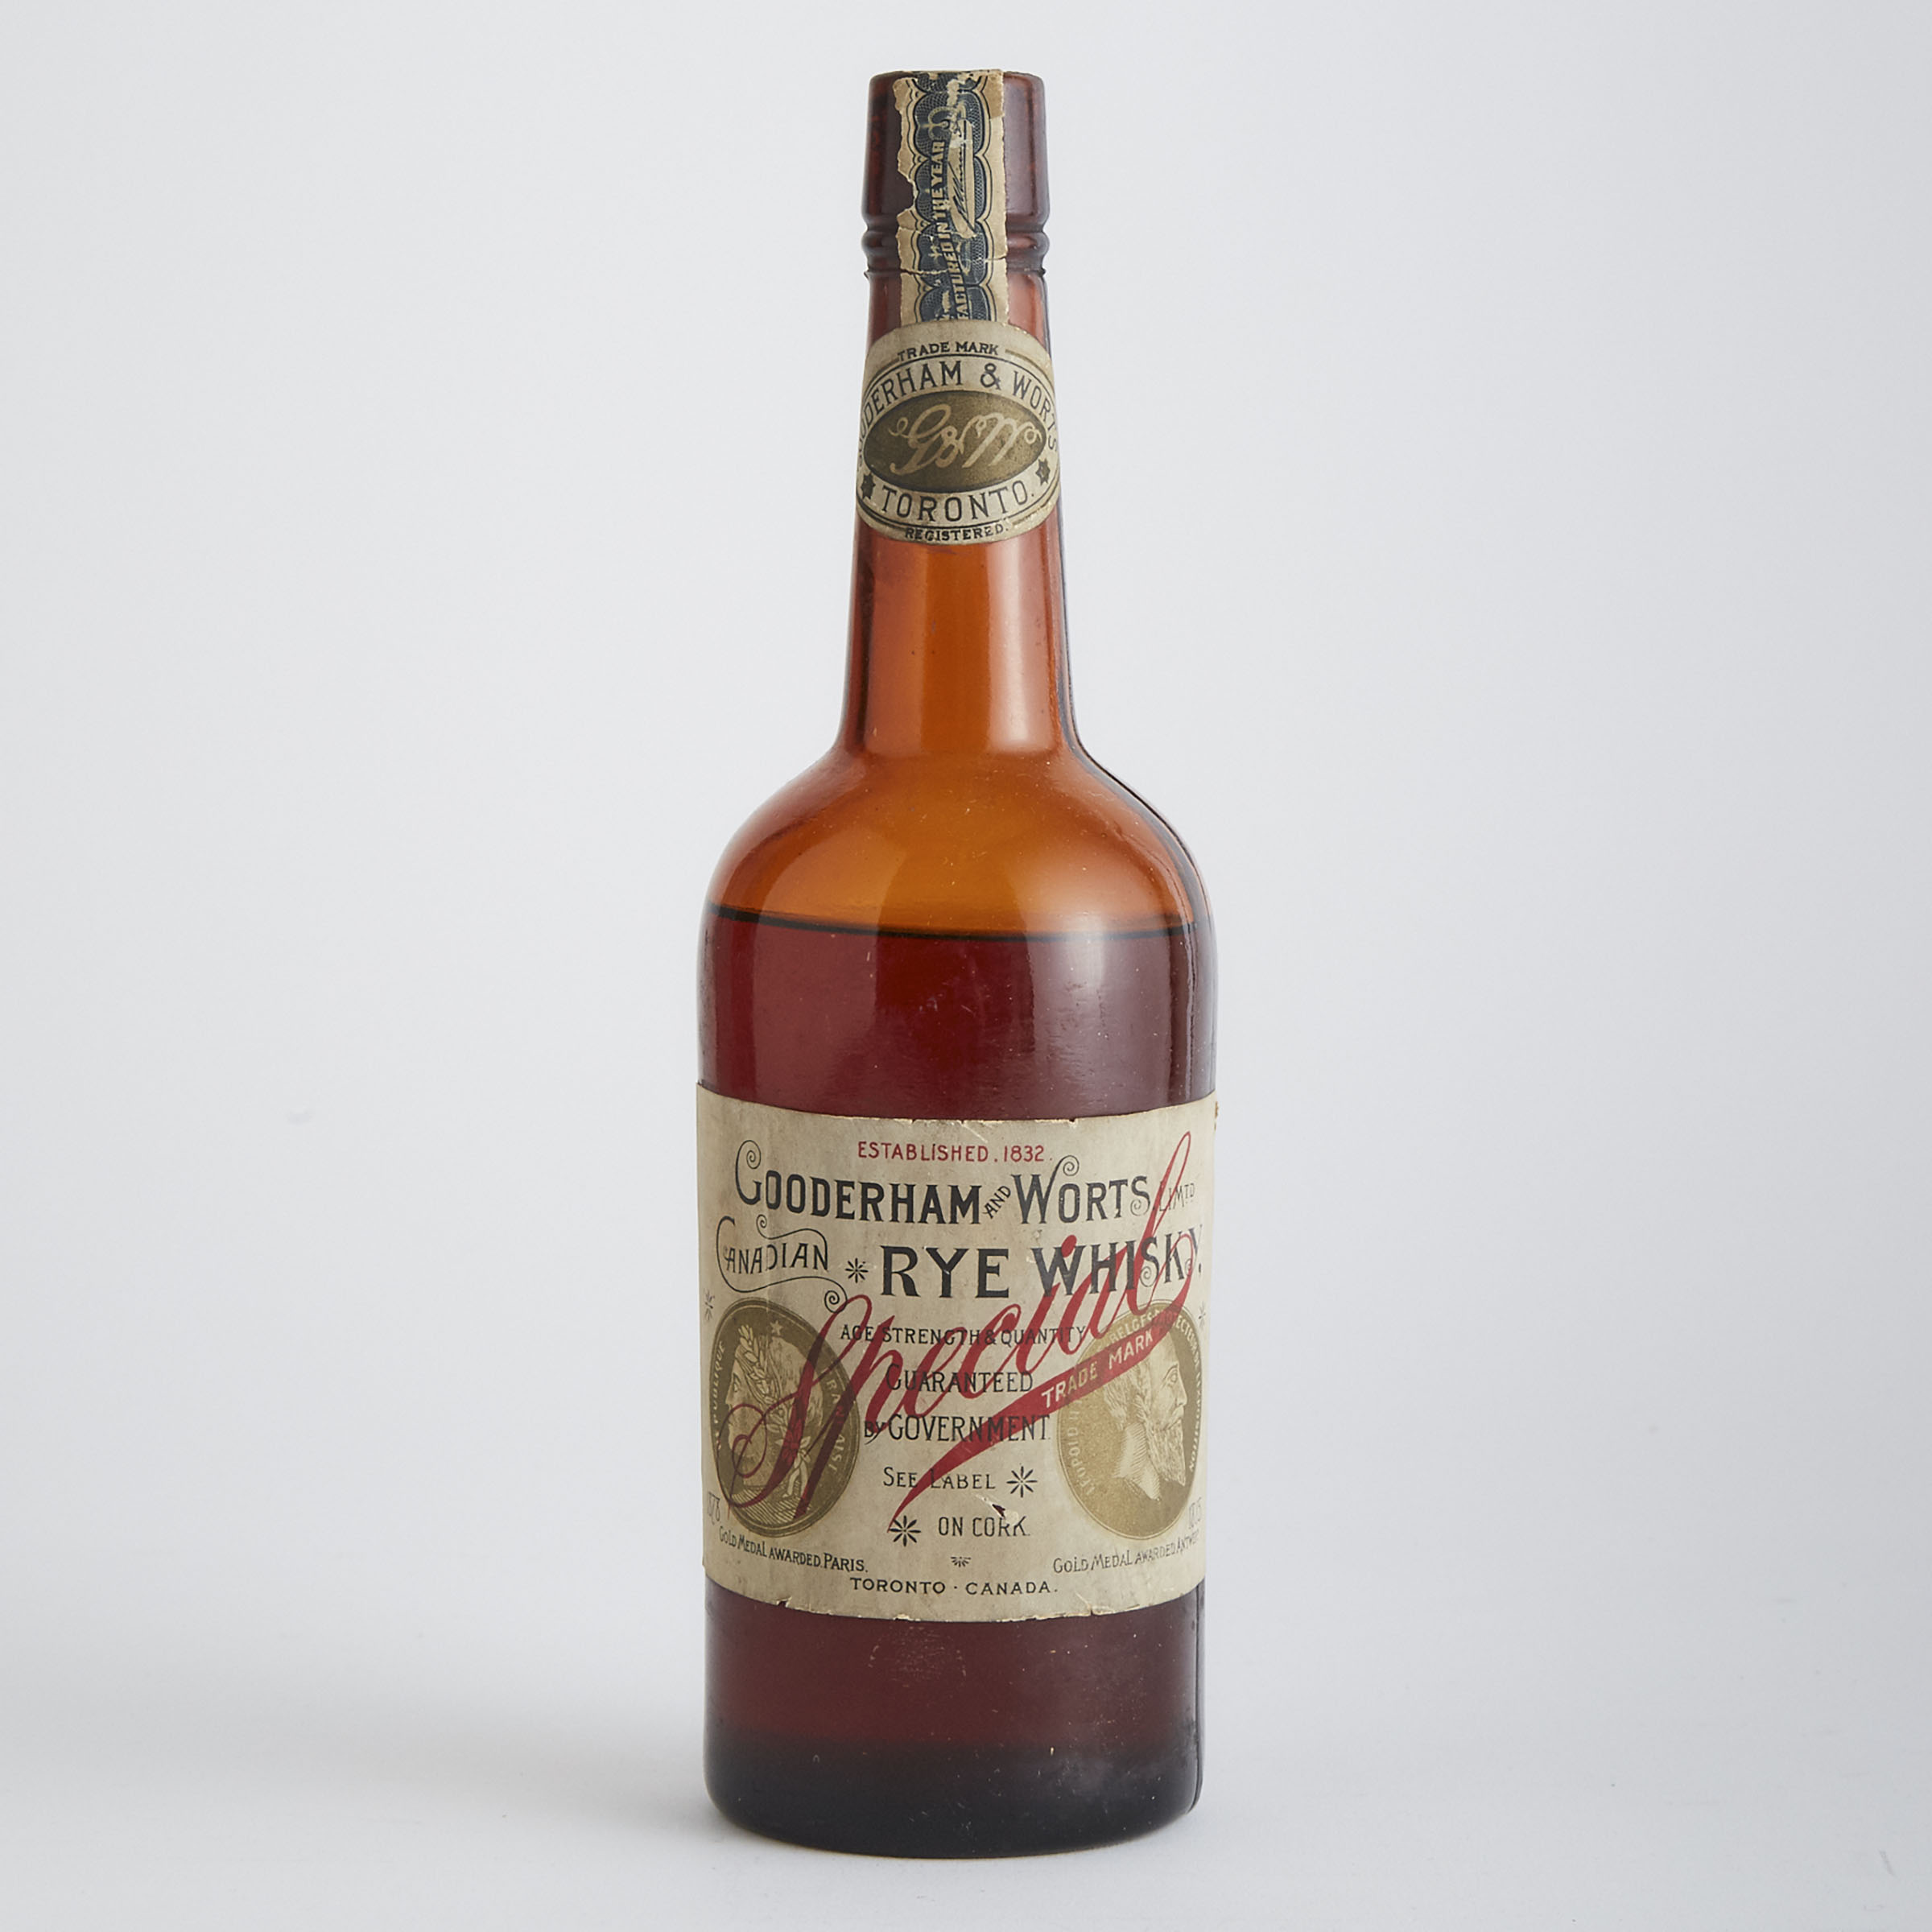 GOODERHAM AND WORTS CANADIAN RYE WHISKY (ONE 25 OZ?)